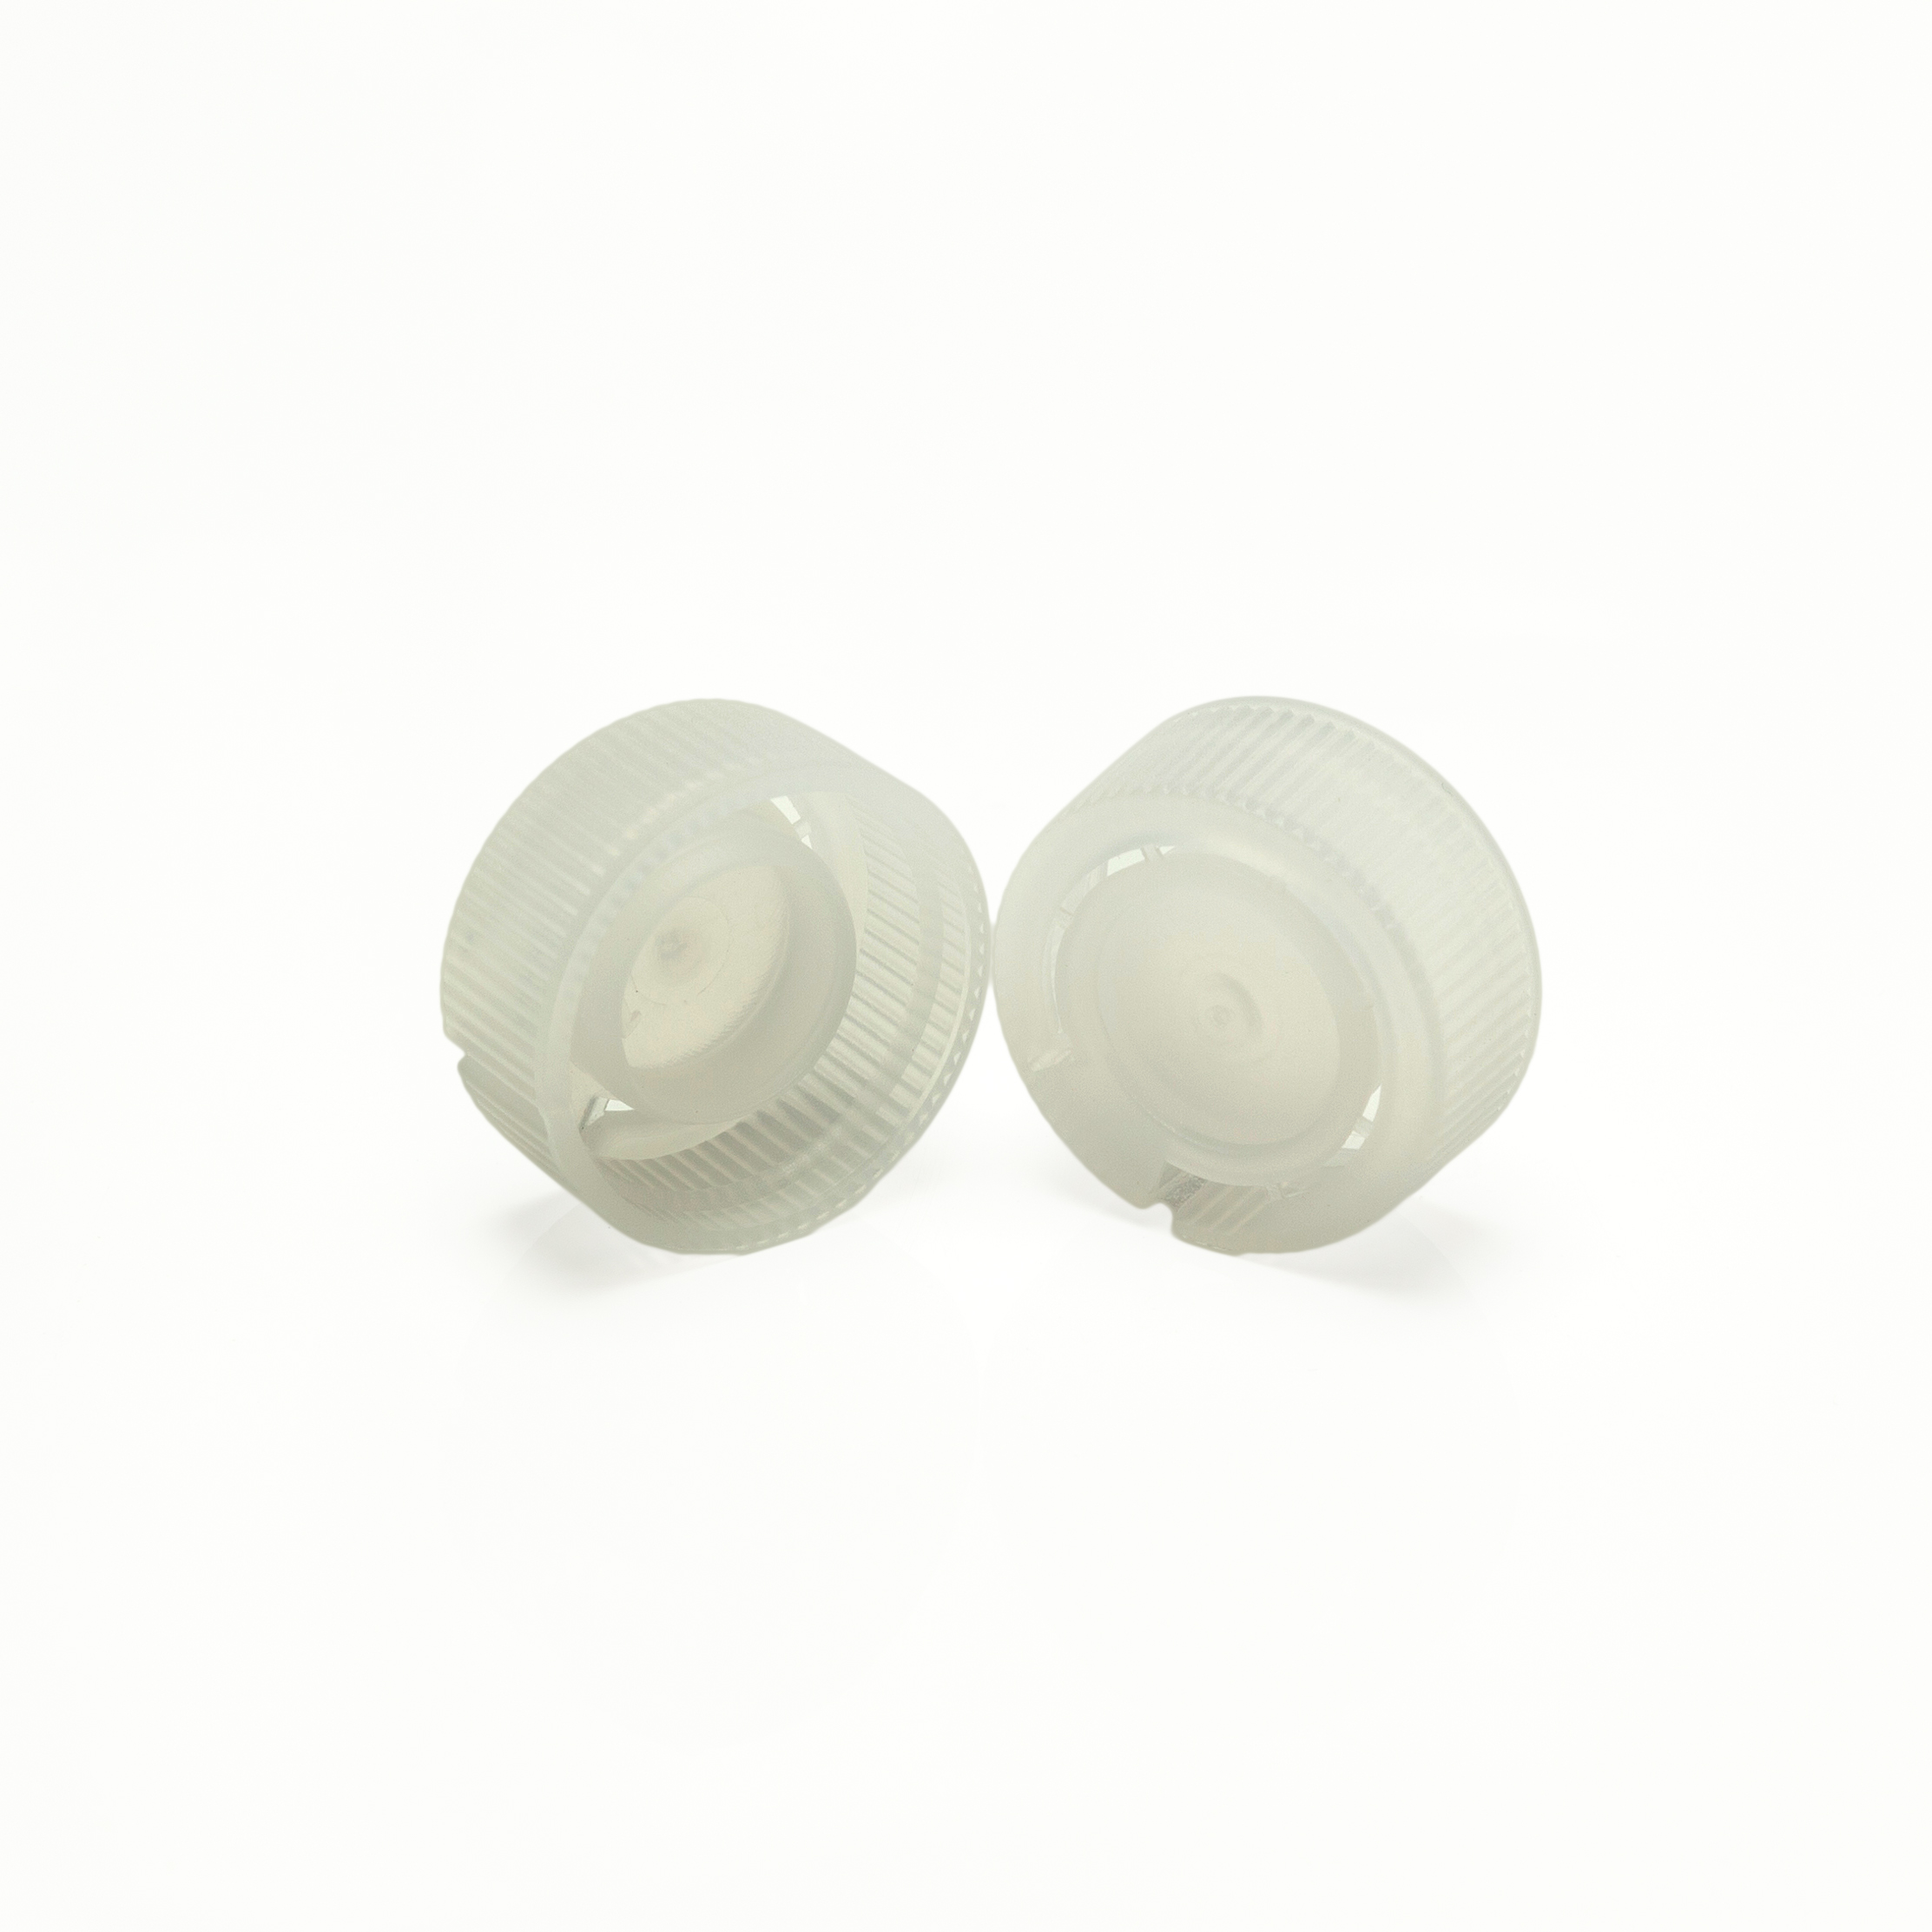 Flat cosmetic 20mm plastic safety capsule